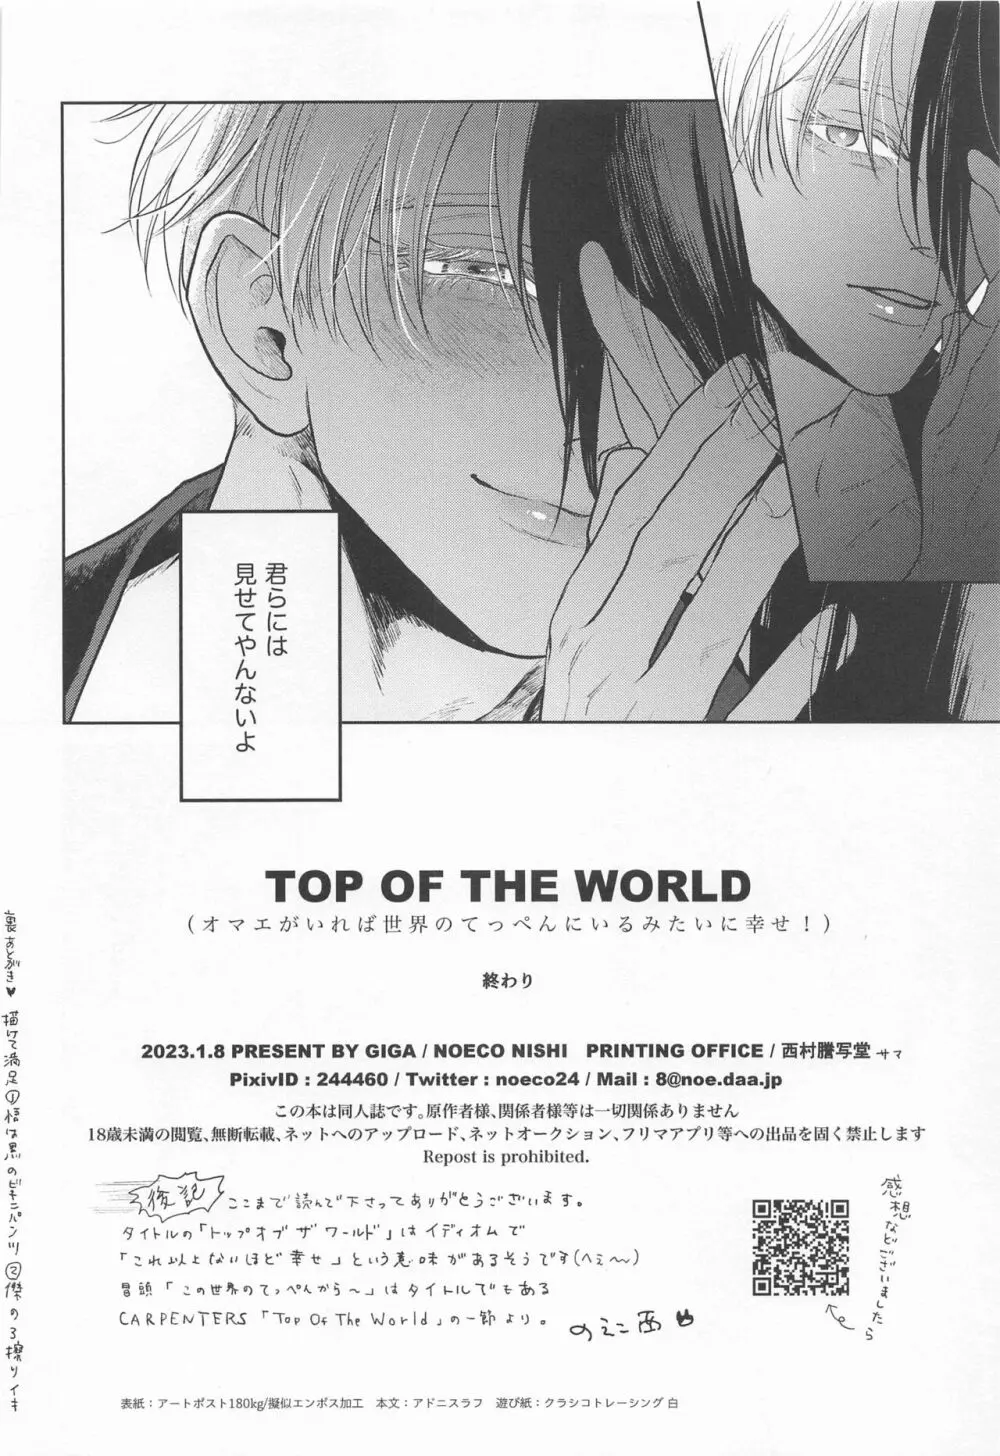 TOP OF THE WORLD 33ページ